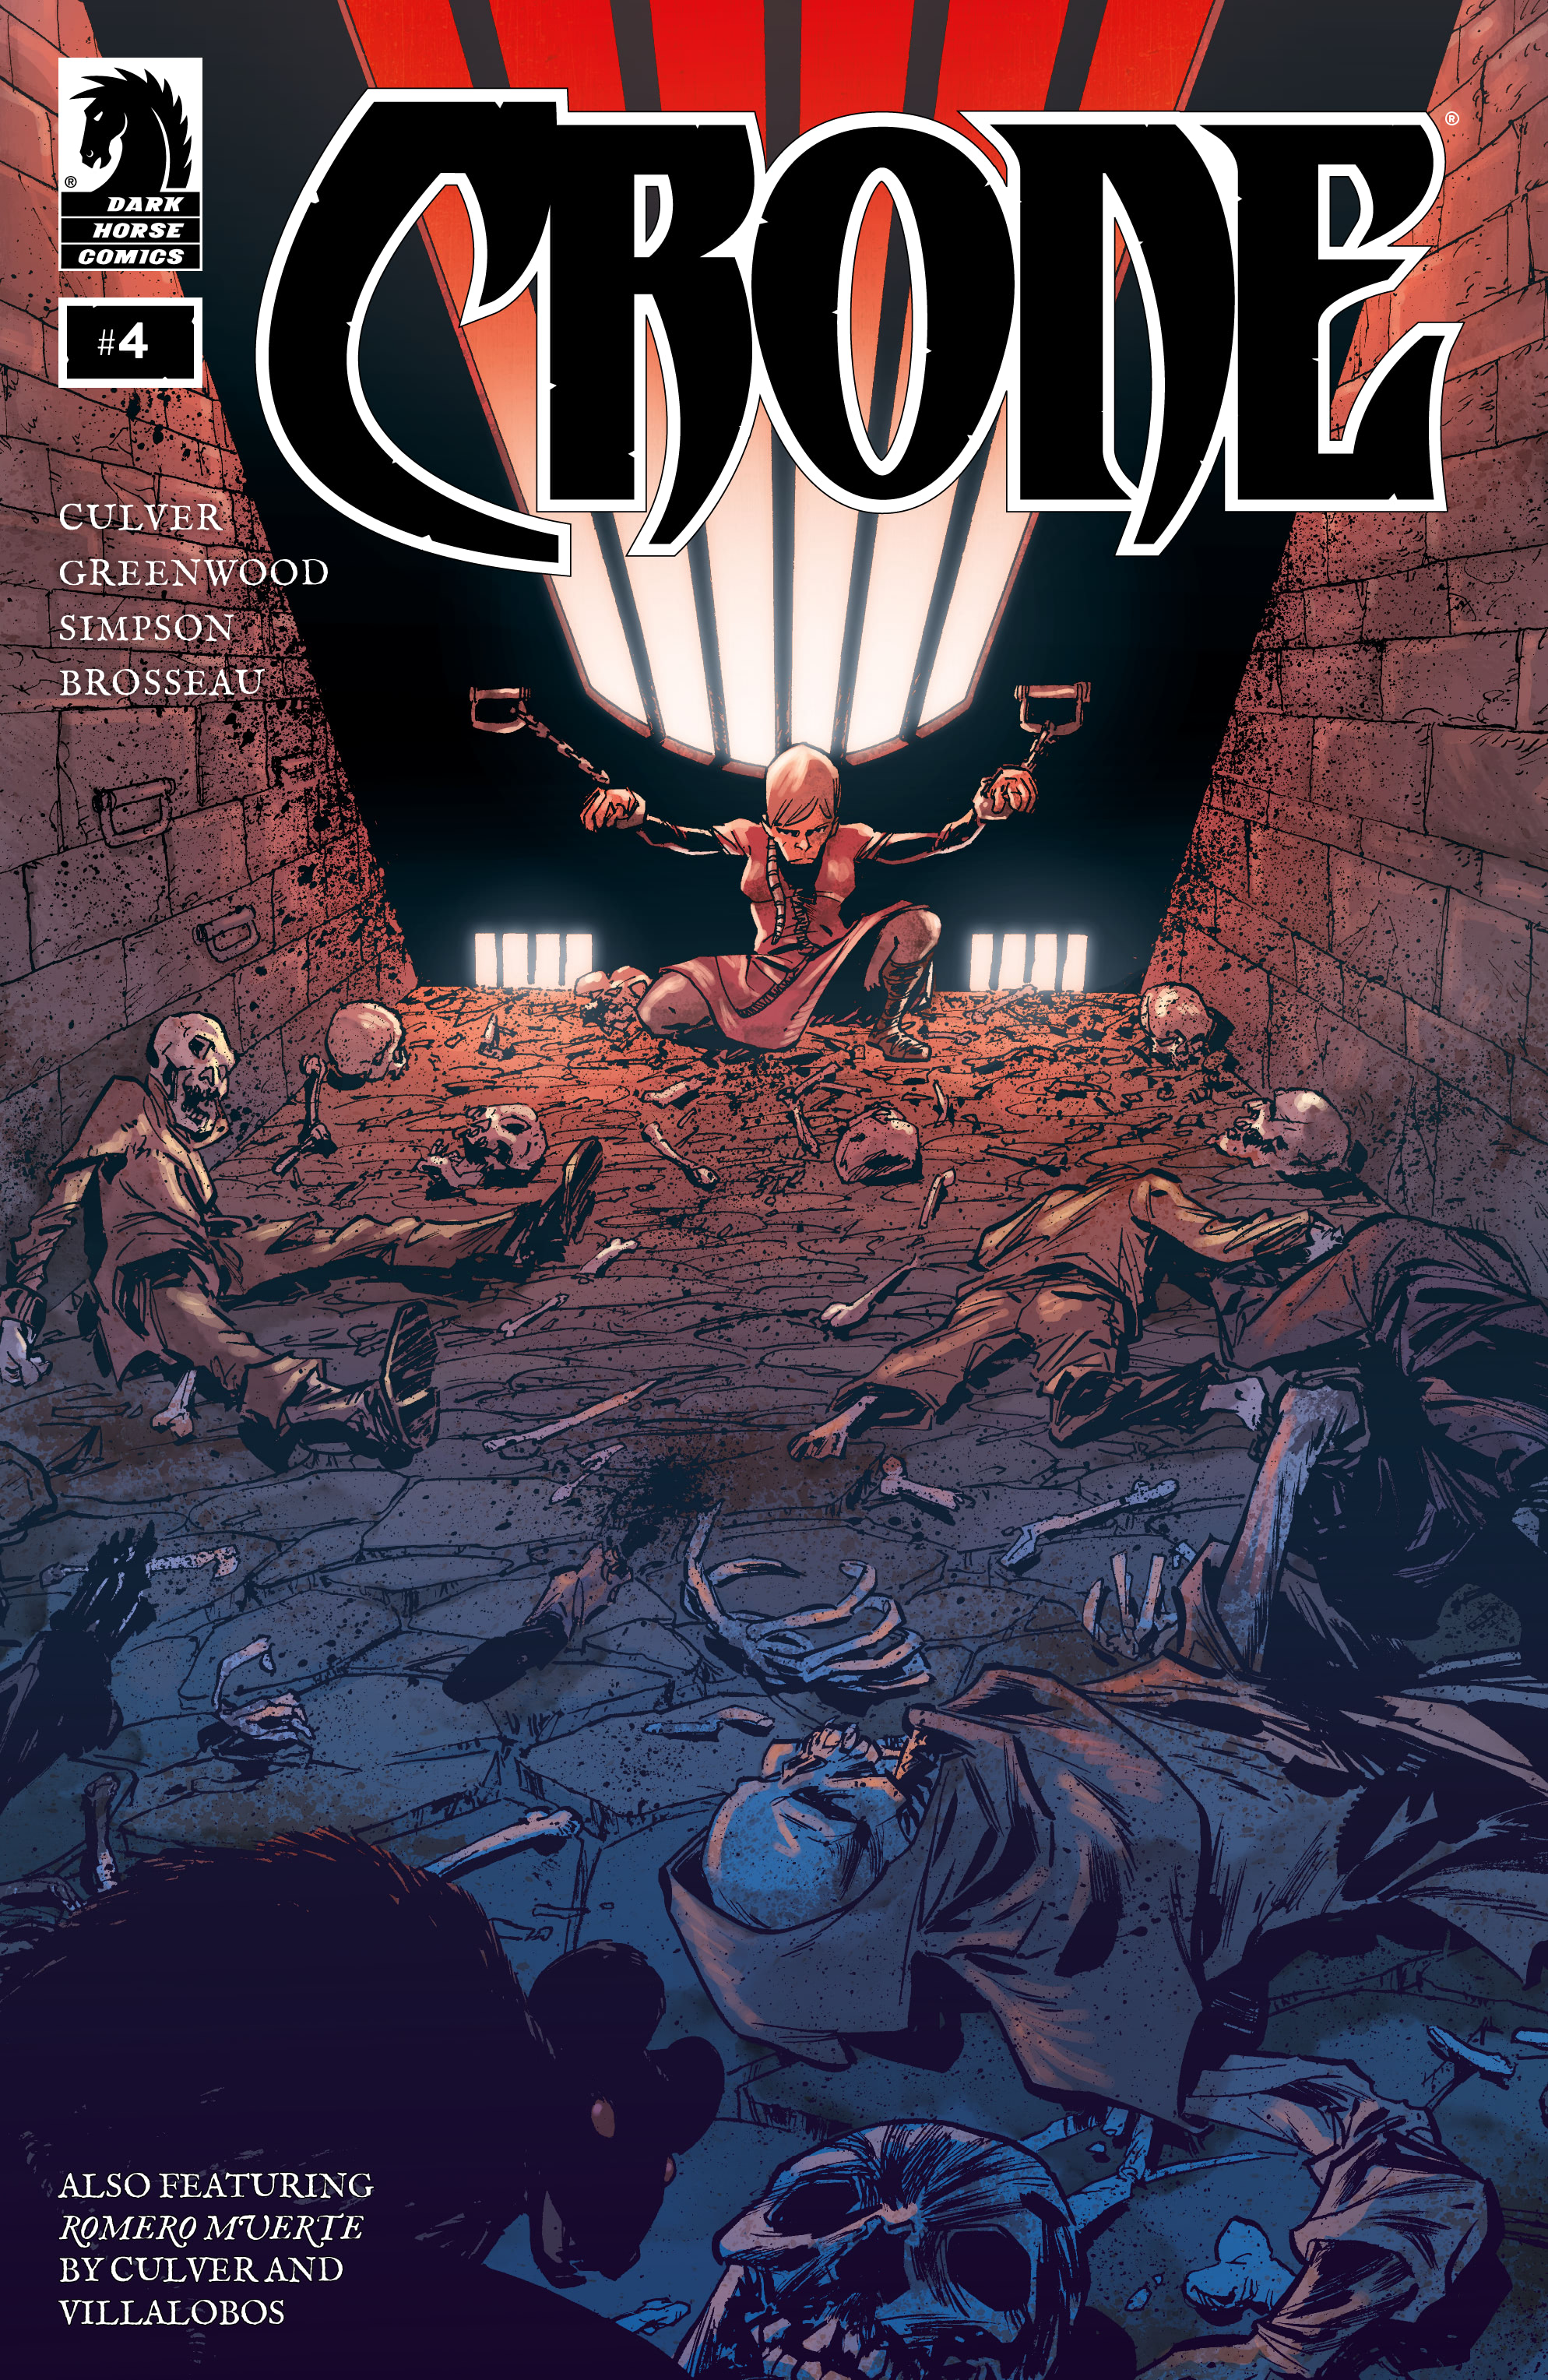 Read online Crone comic -  Issue #4 - 1